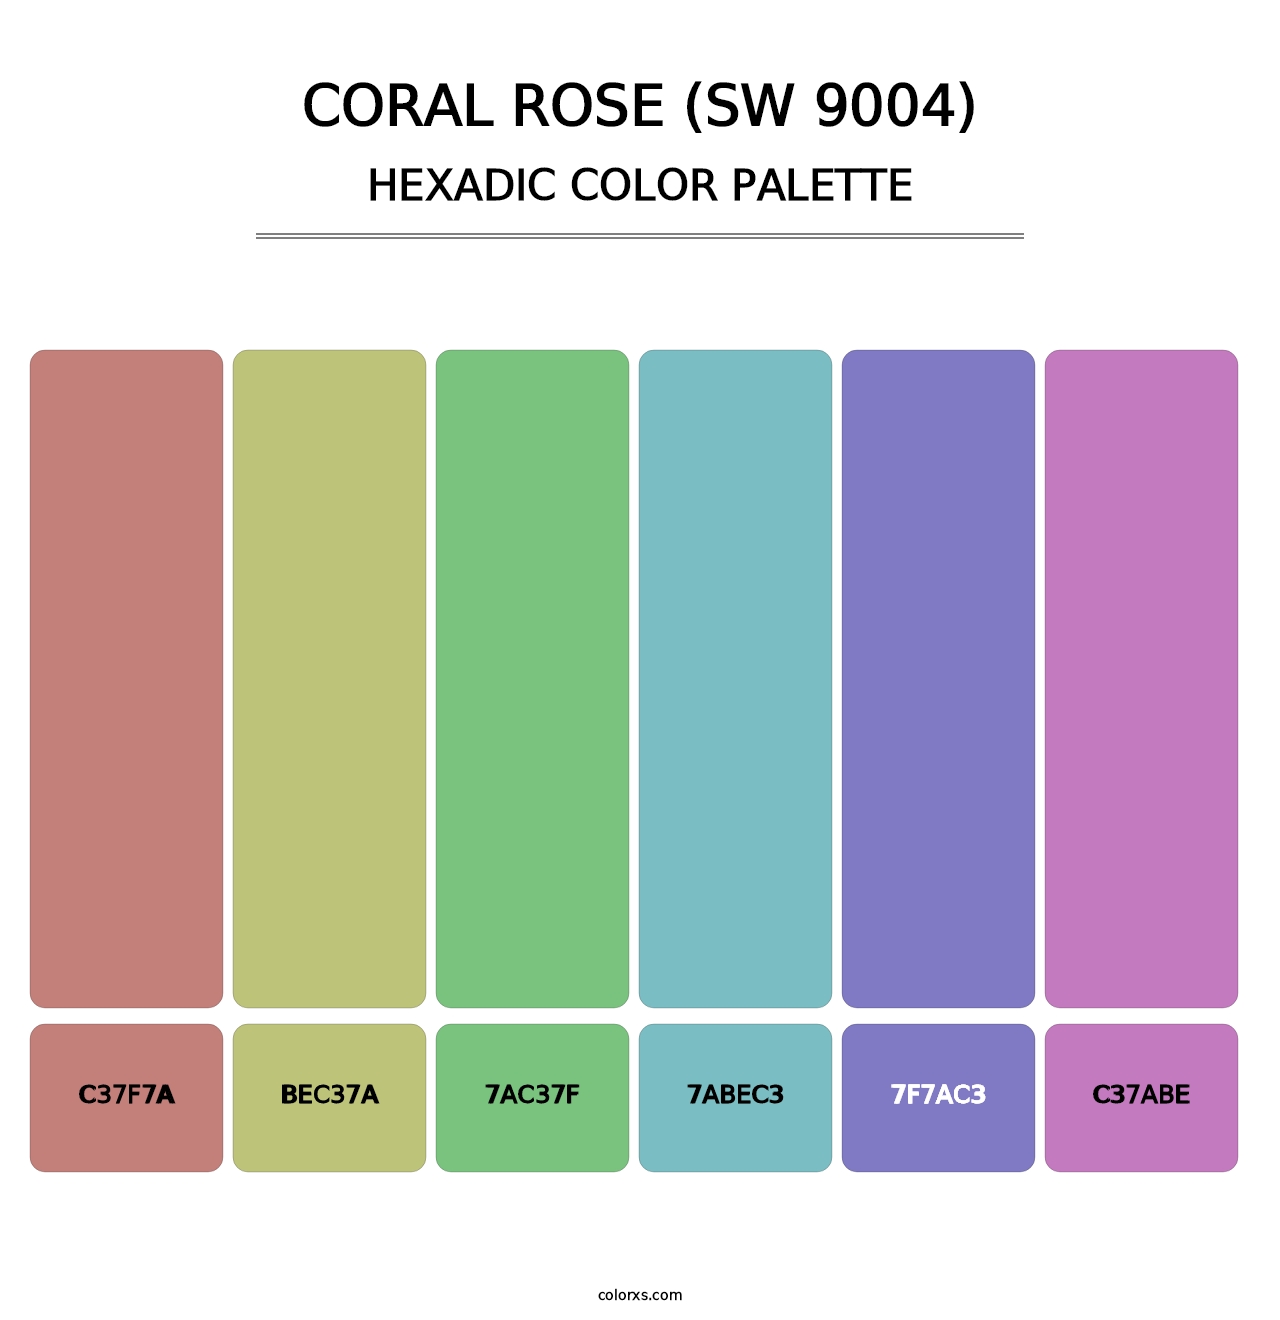 Coral Rose (SW 9004) - Hexadic Color Palette